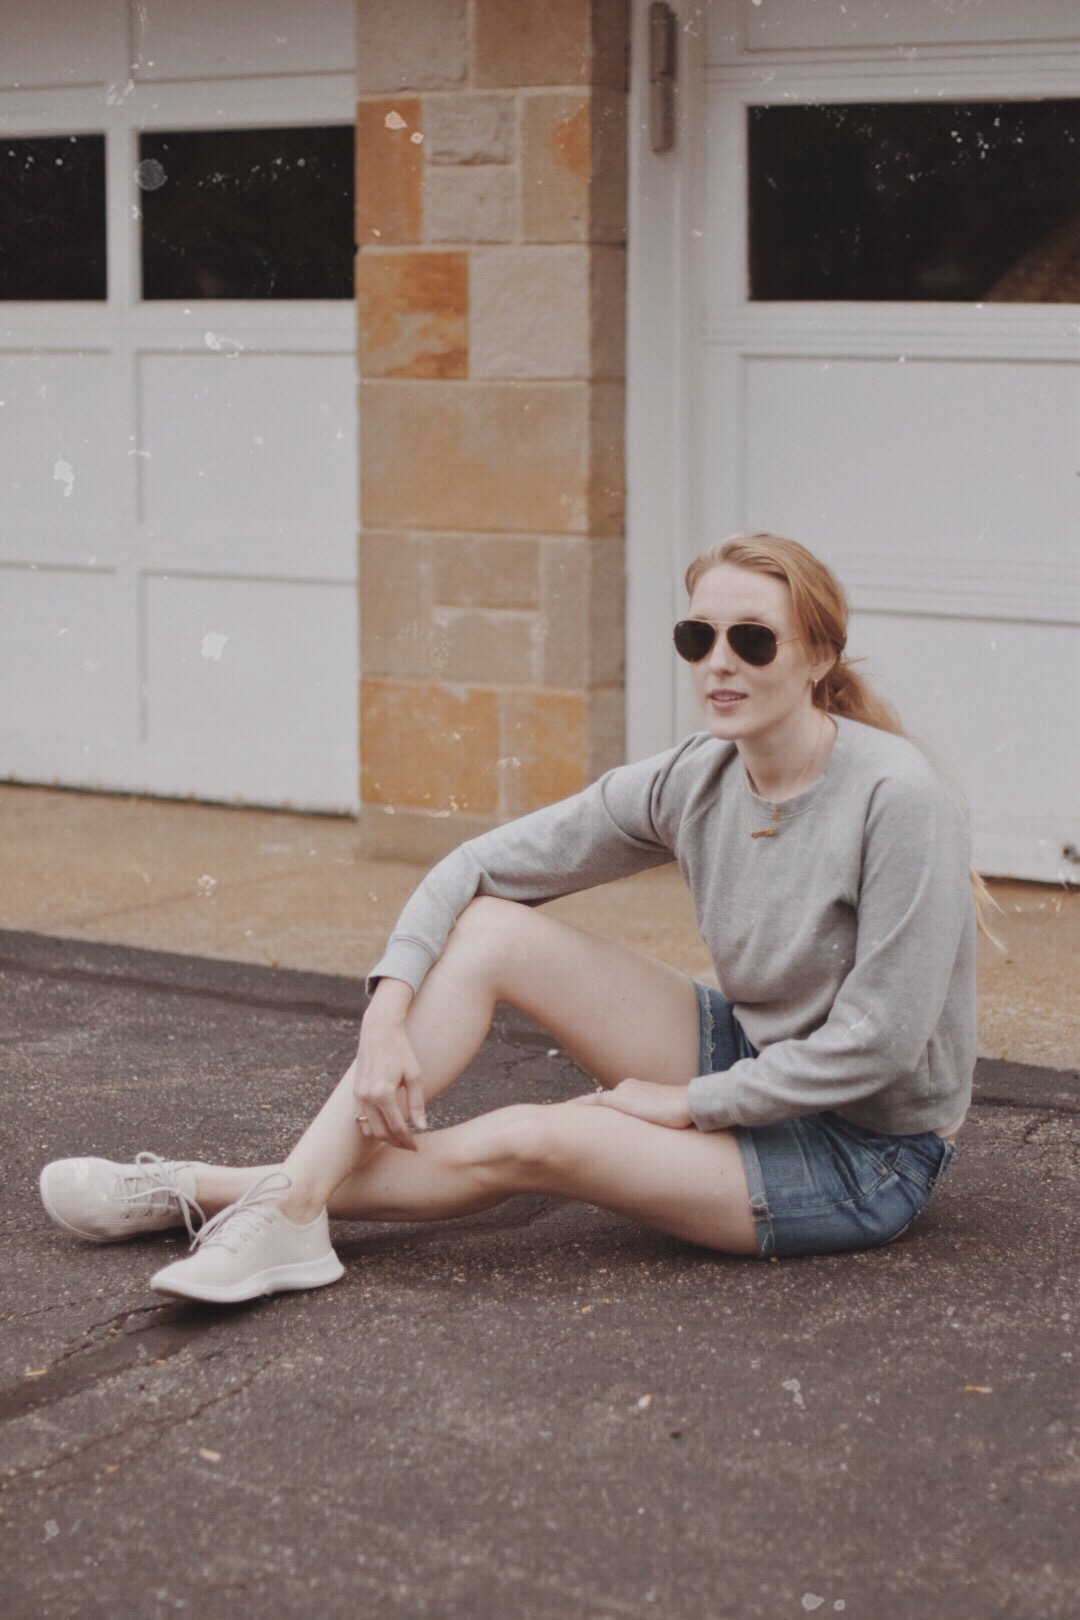 styling an easy casual summer outfit idea with sustainable fashion brands Everlane crewneck sweatshirt, Allbirds sneakers, cutoff shorts